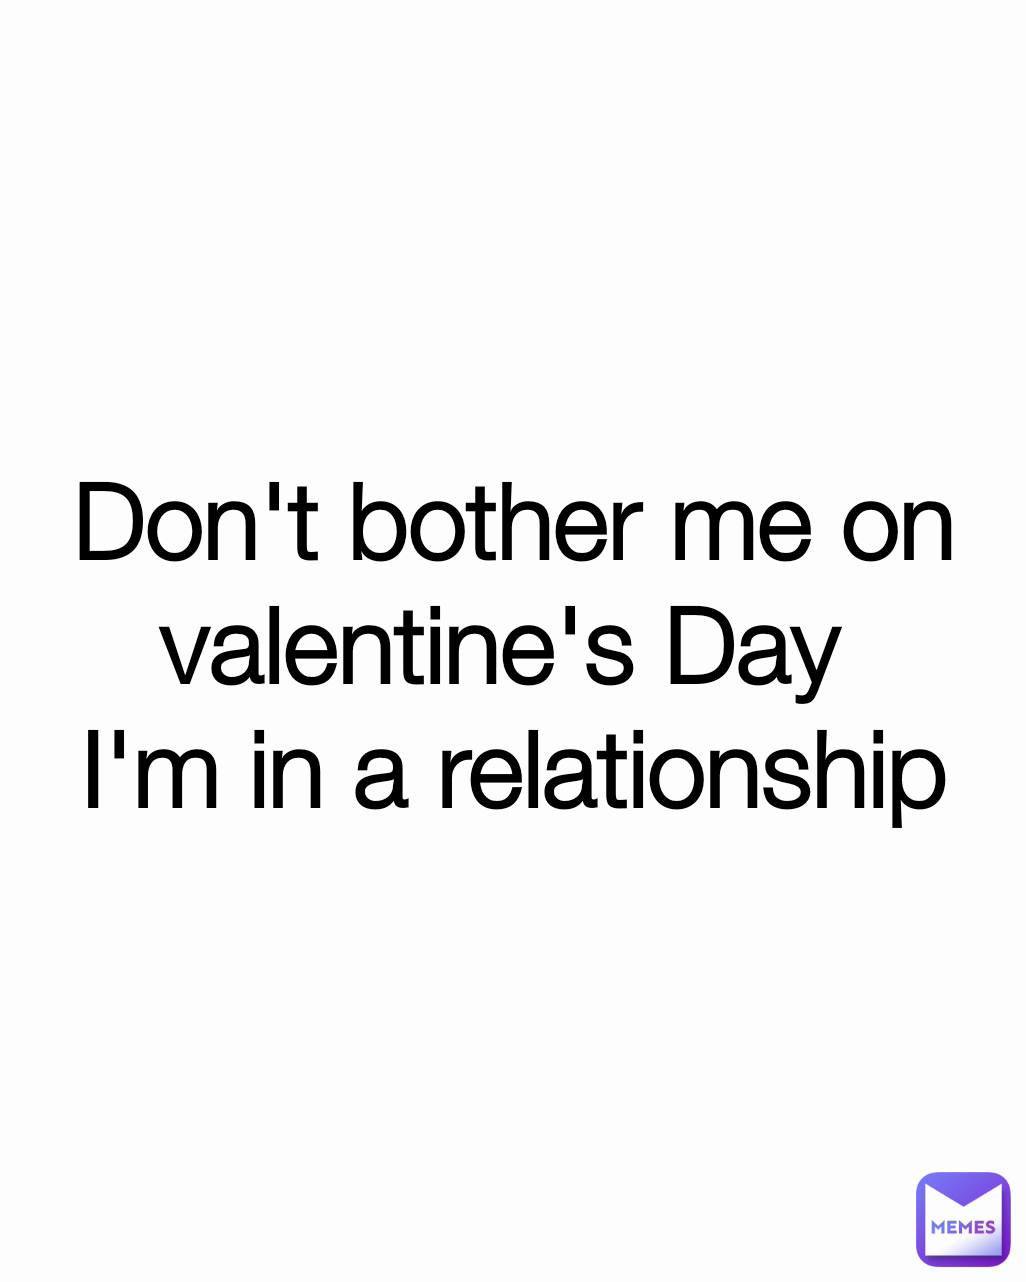 Don't bother me on valentine's Day 
I'm in a relationship